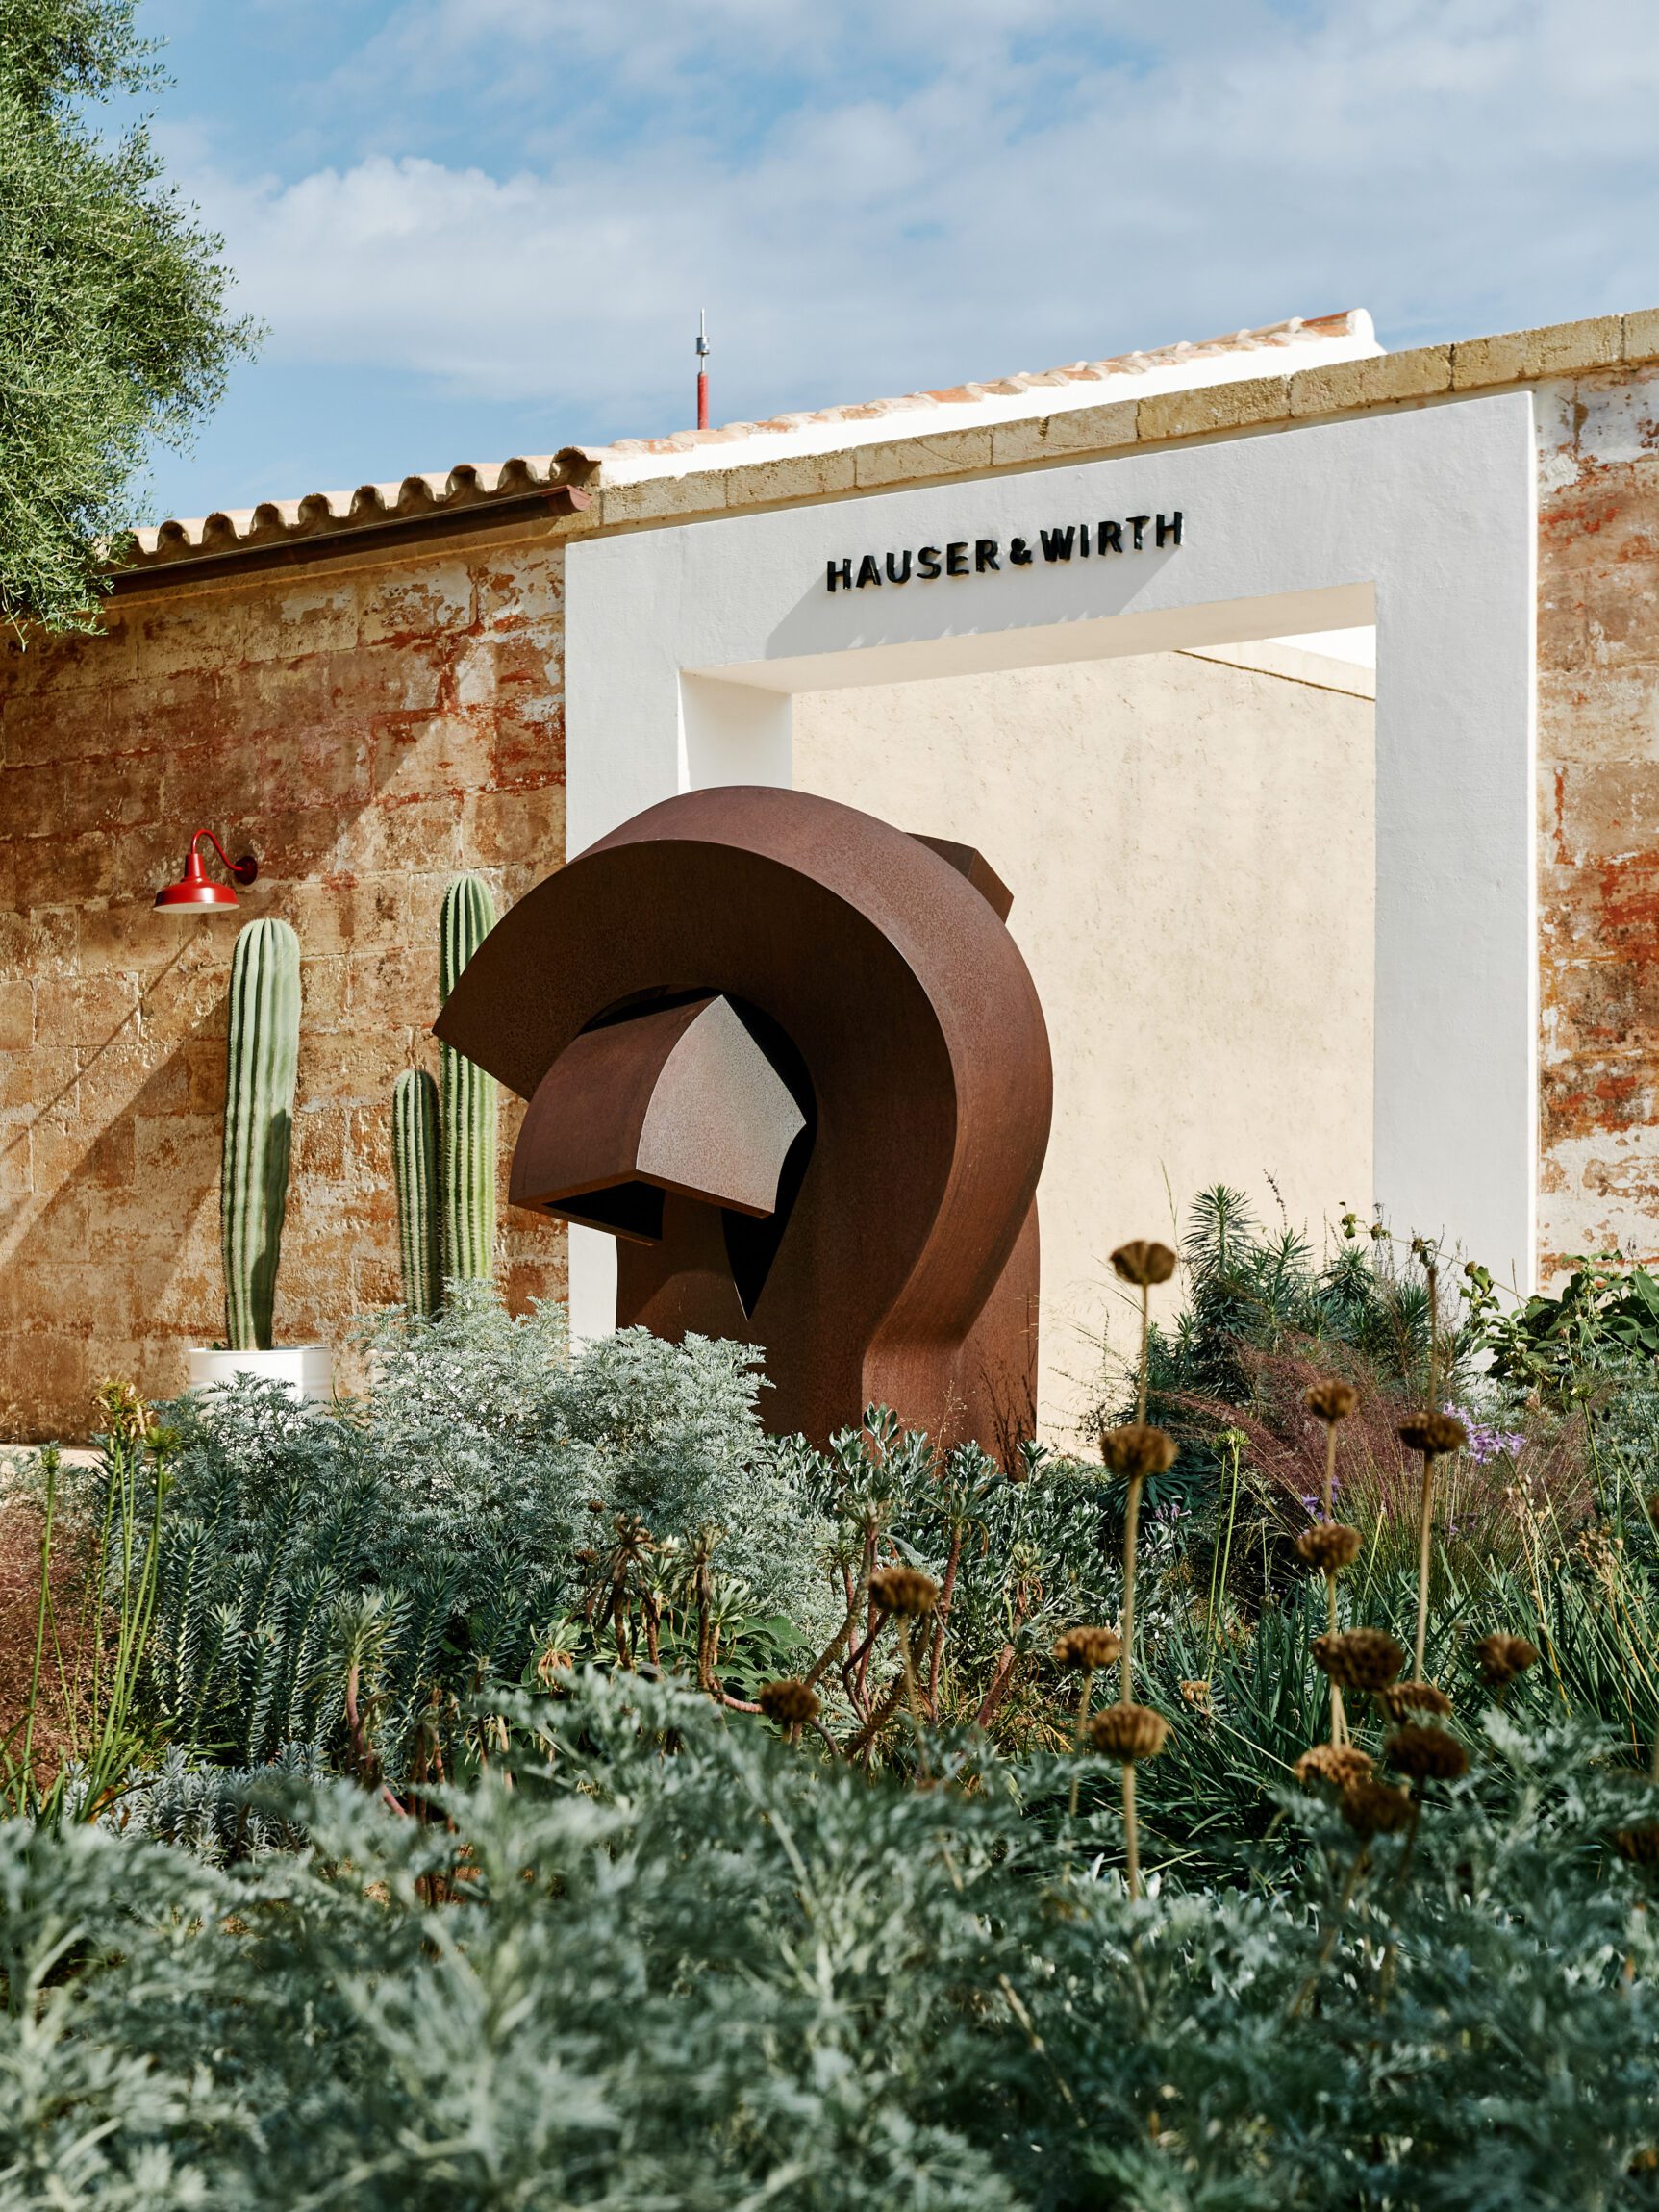 The most beautiful art and design destinations in Europe | Hauser & Wirth Menorca, on the Isla del Rey in Mahon harbour, with garden design by Piet Oudolf, and a steel sculpture by Eduardo Chillida